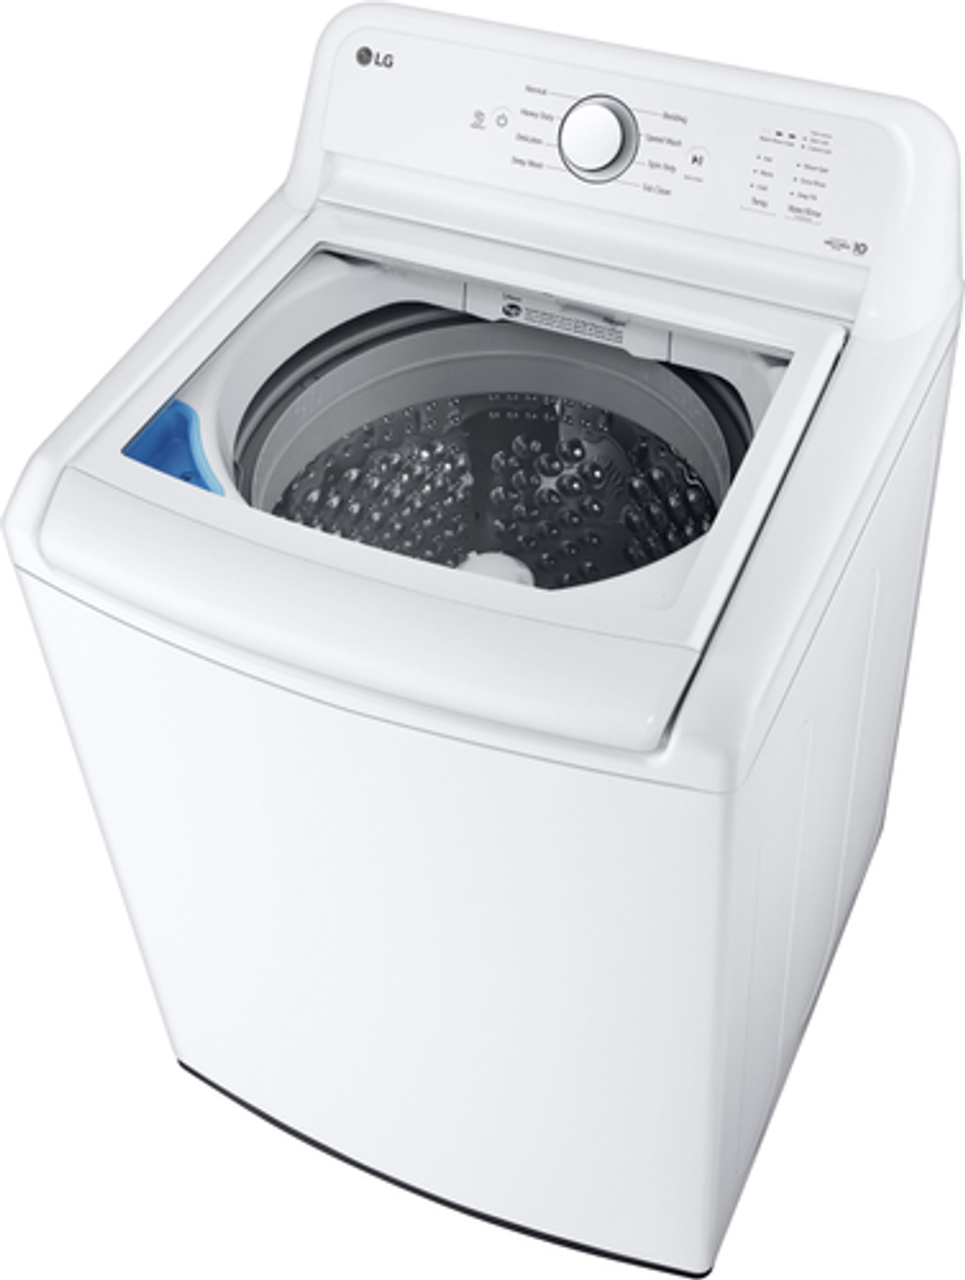 LG - 4.1 Cu. Ft. Smart Top Load Washer with SlamProof Glass Lid - White